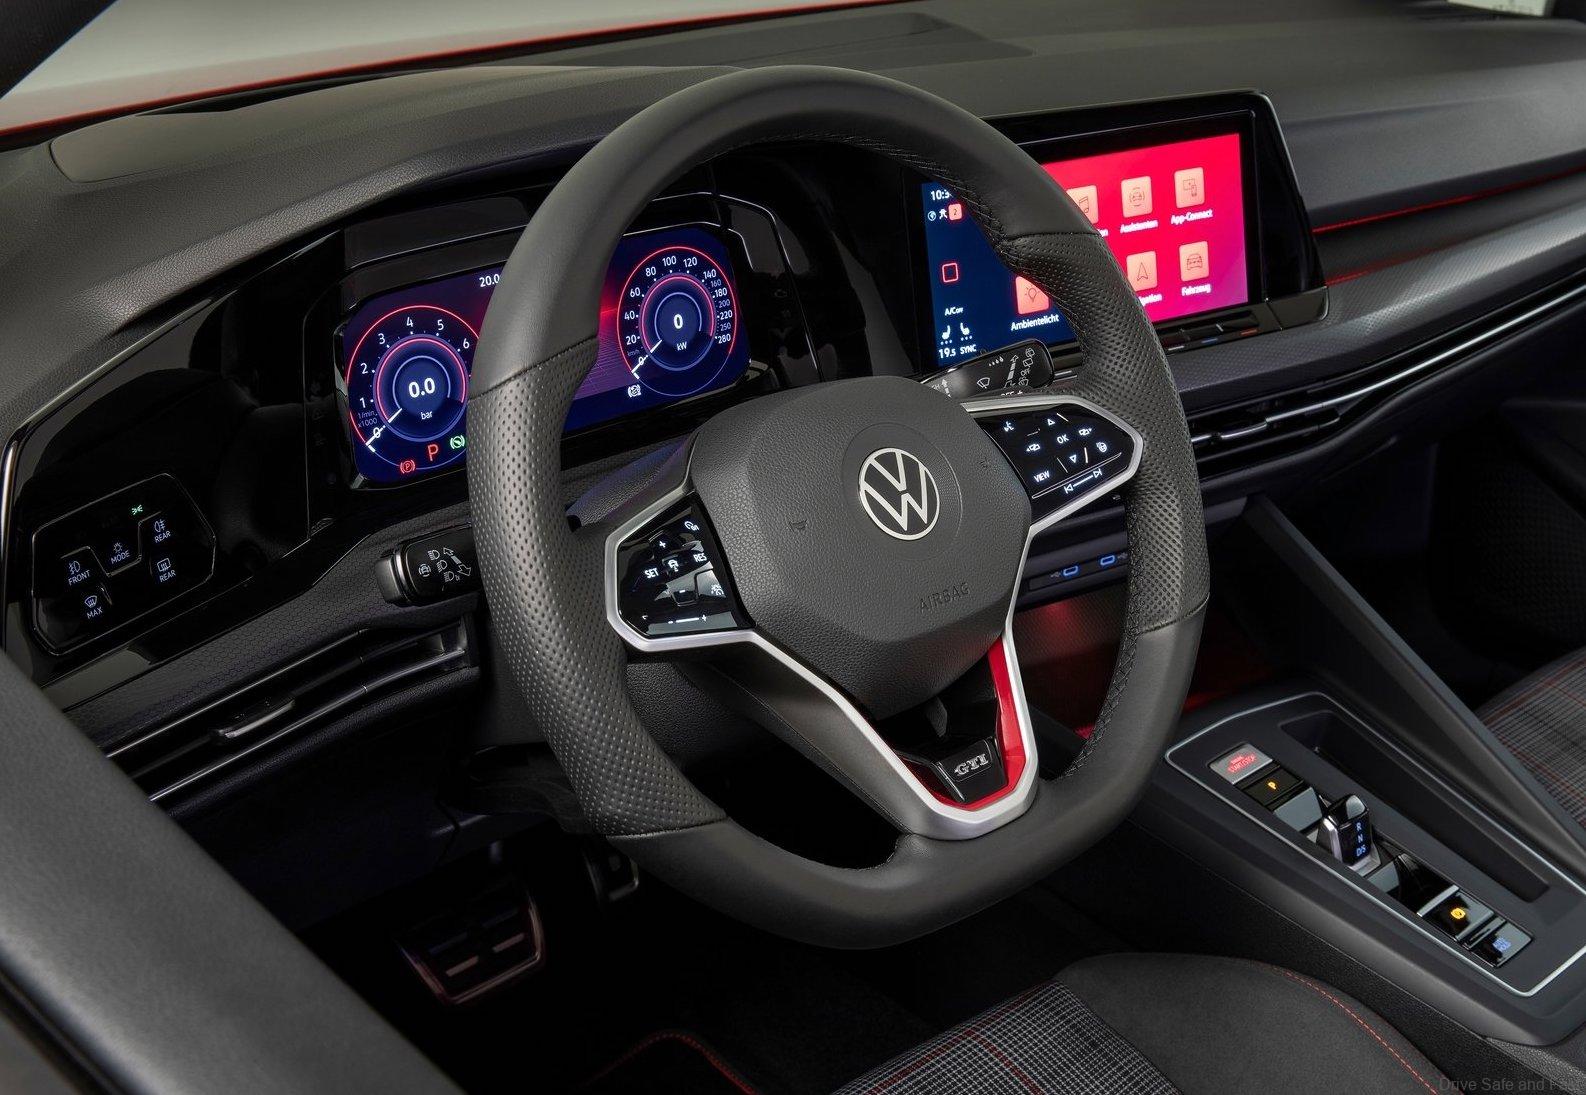 REVIEW: Volkswagen Golf GTI Mk8 tested in Malaysia - priced at RM212k